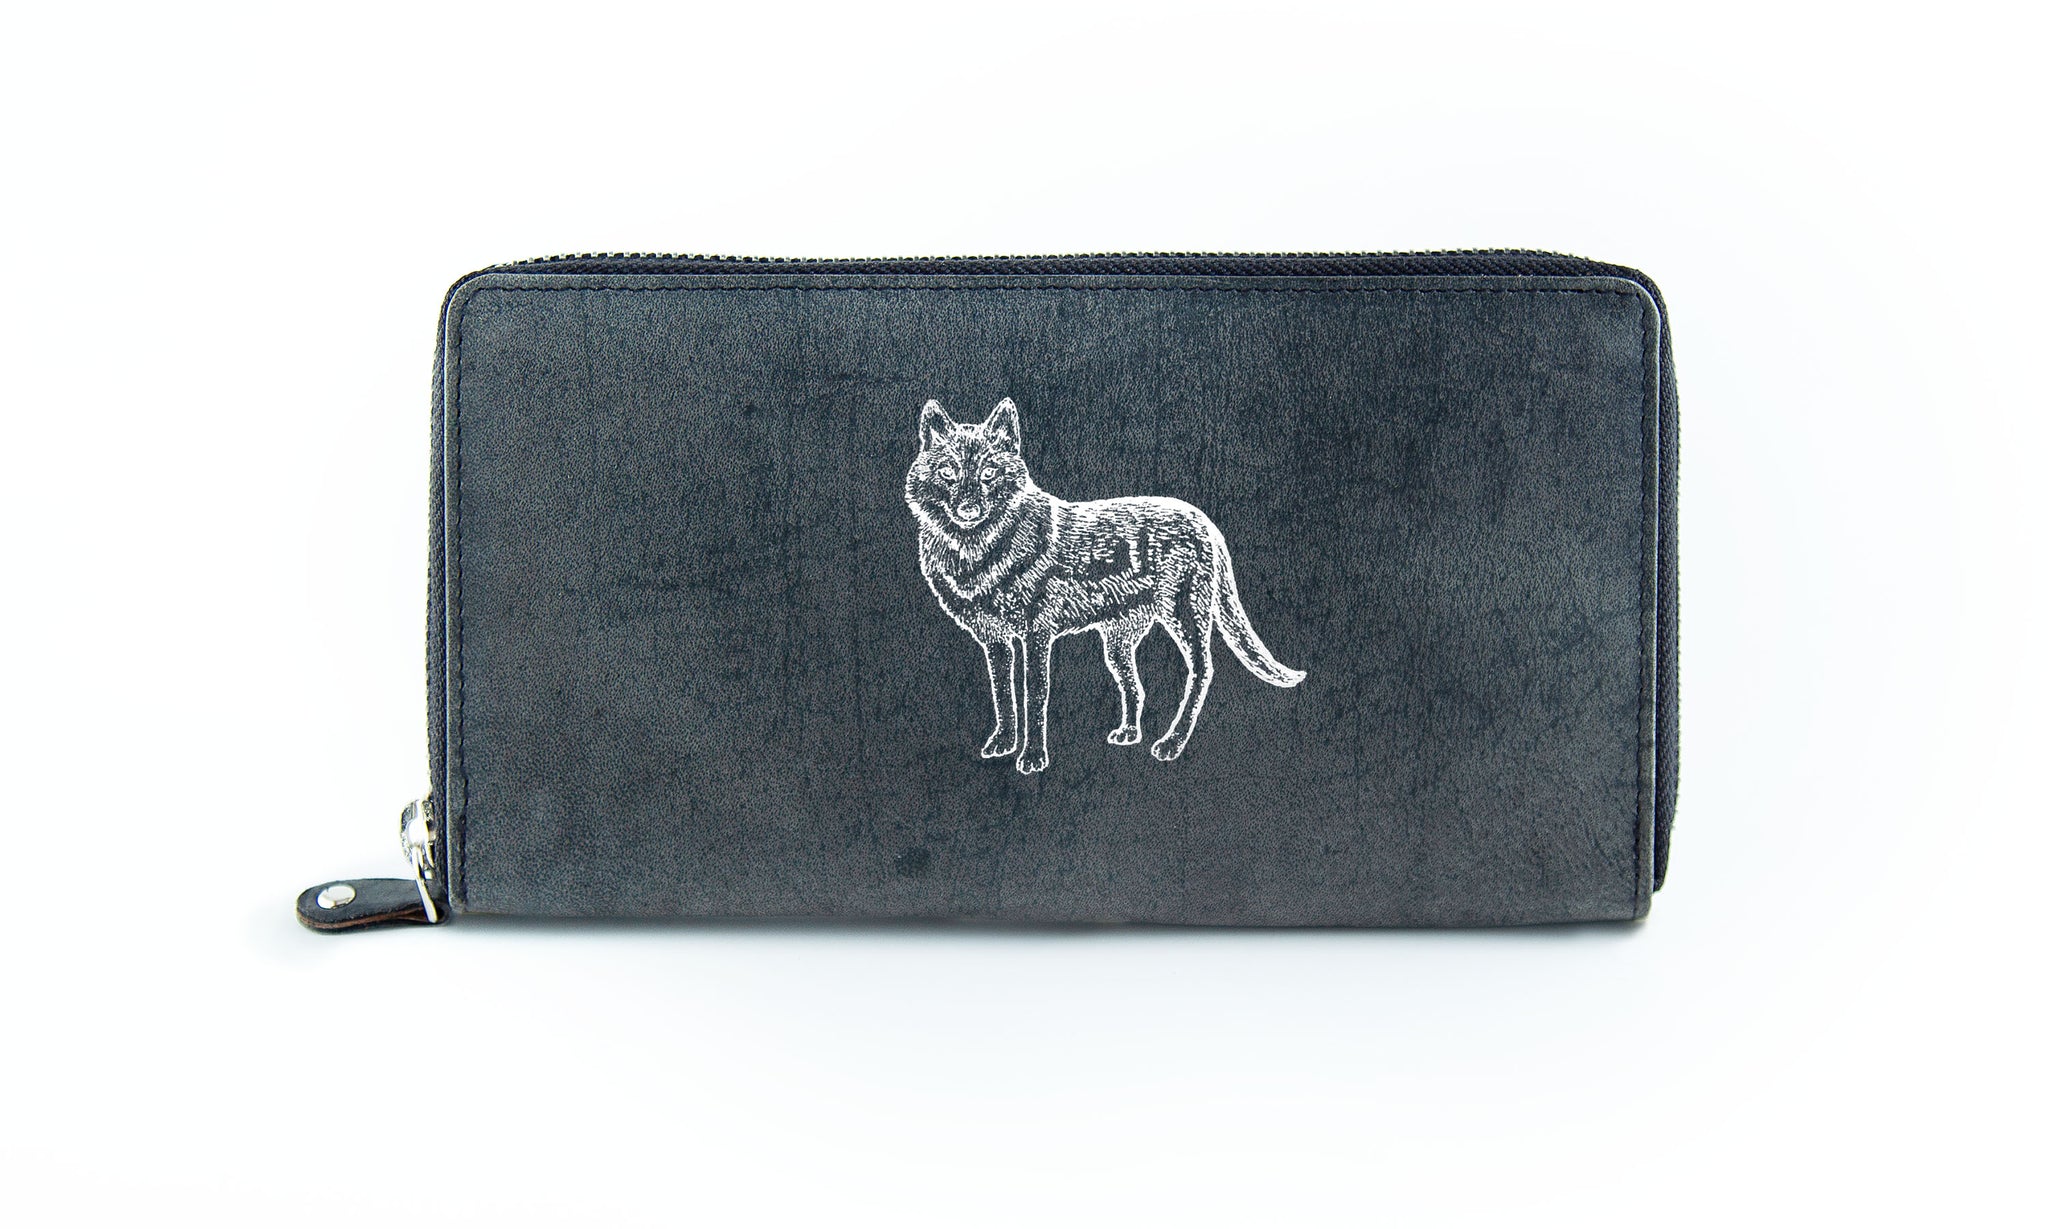 The Clutch - Antique Grey (White Print)